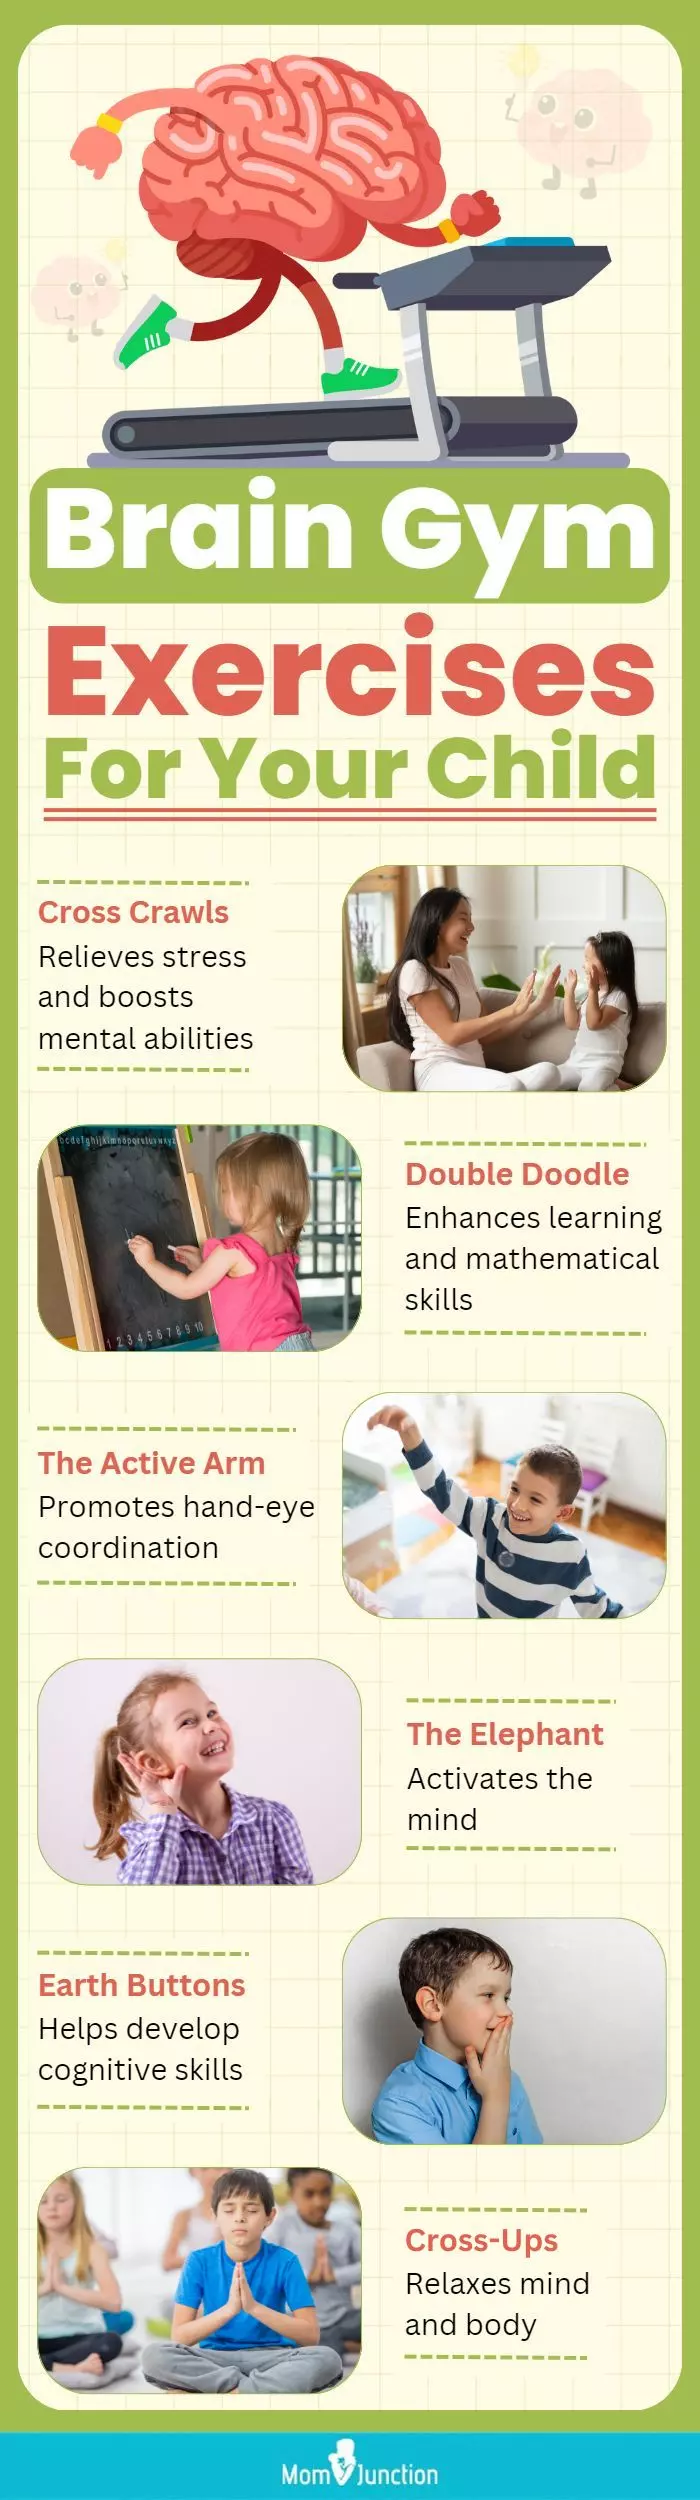 brain gym exercises for your child (infographic)